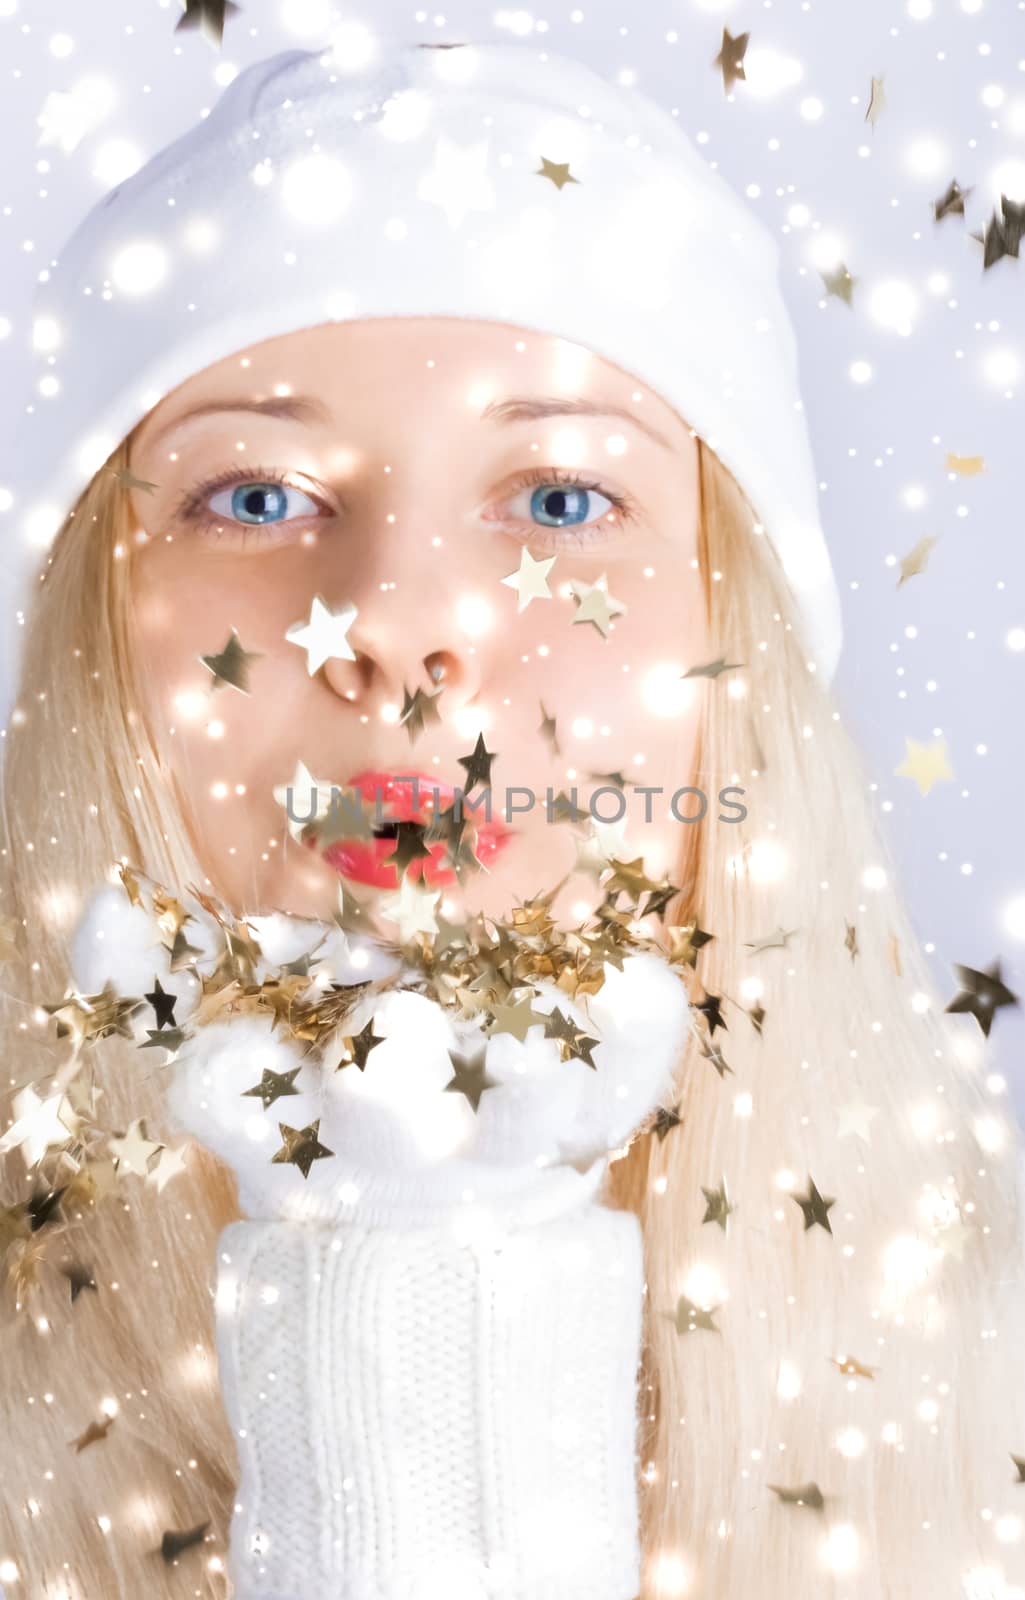 Shiny Christmas and glitter snow background, blonde woman with p by Anneleven